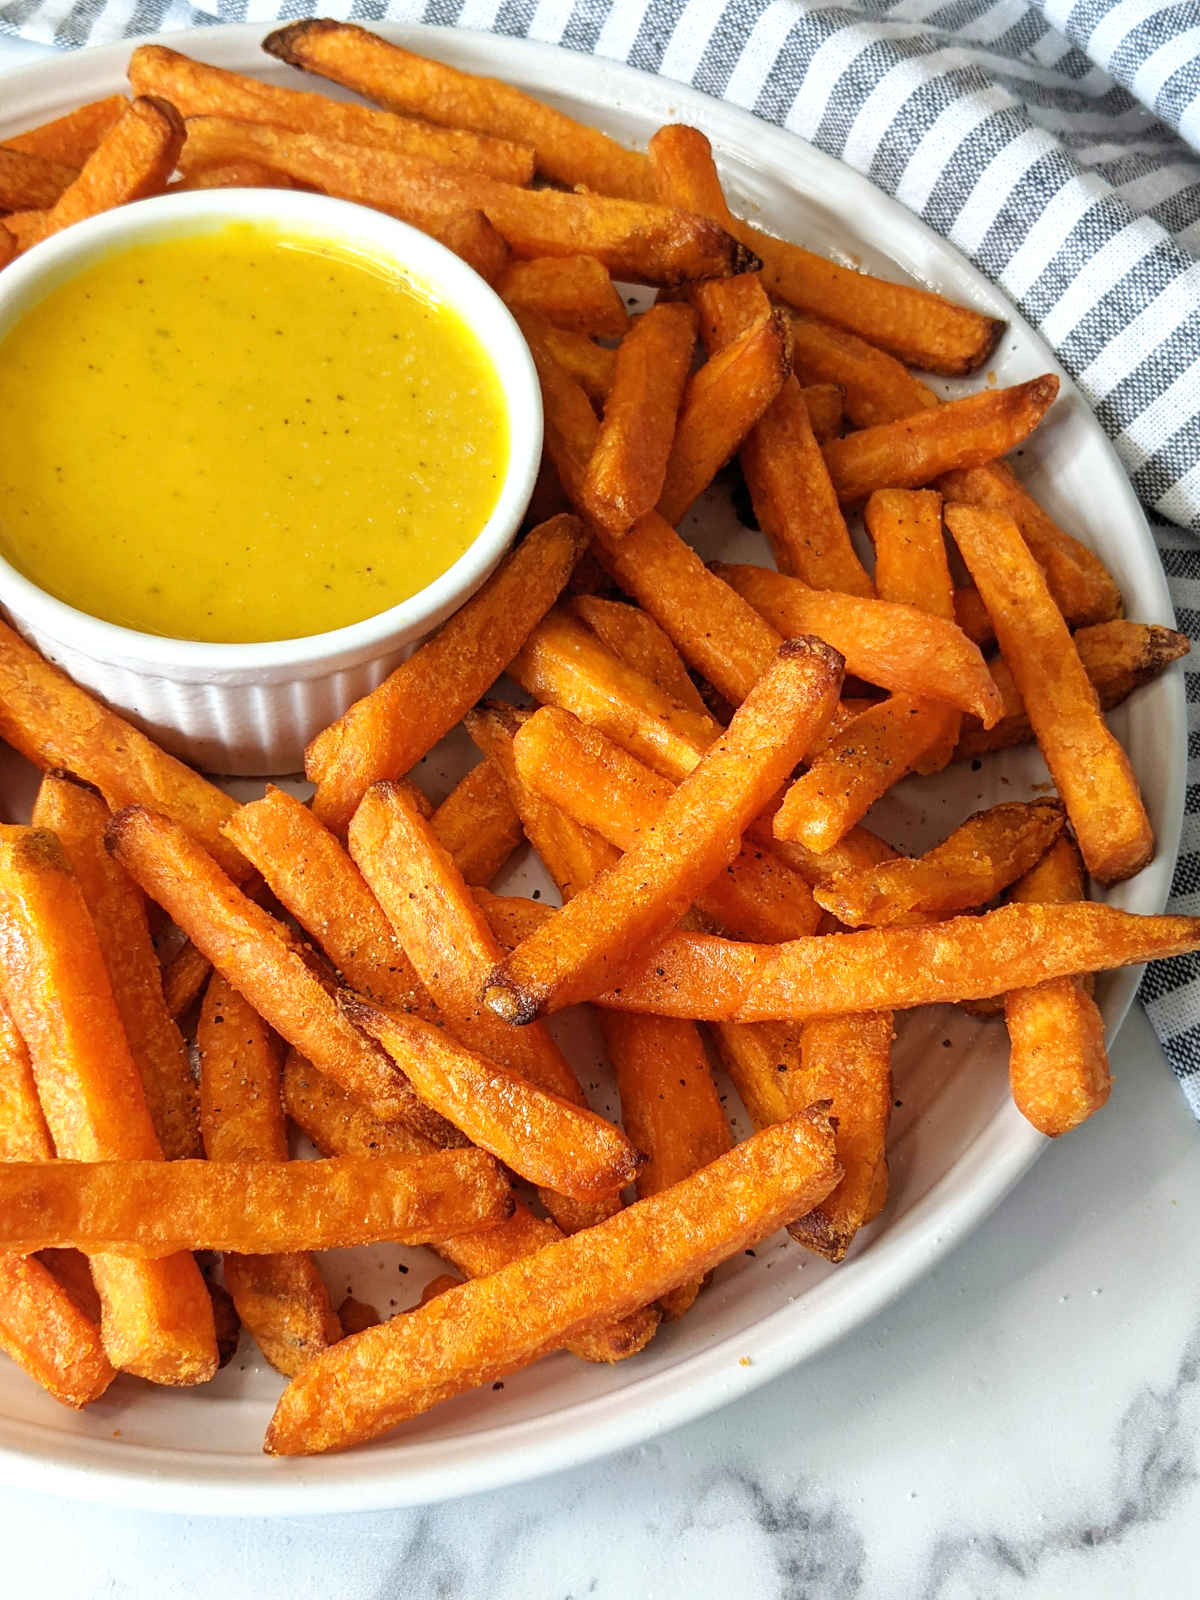 Sweet potato fries on a serving plate with a small bowl of honey mustard.